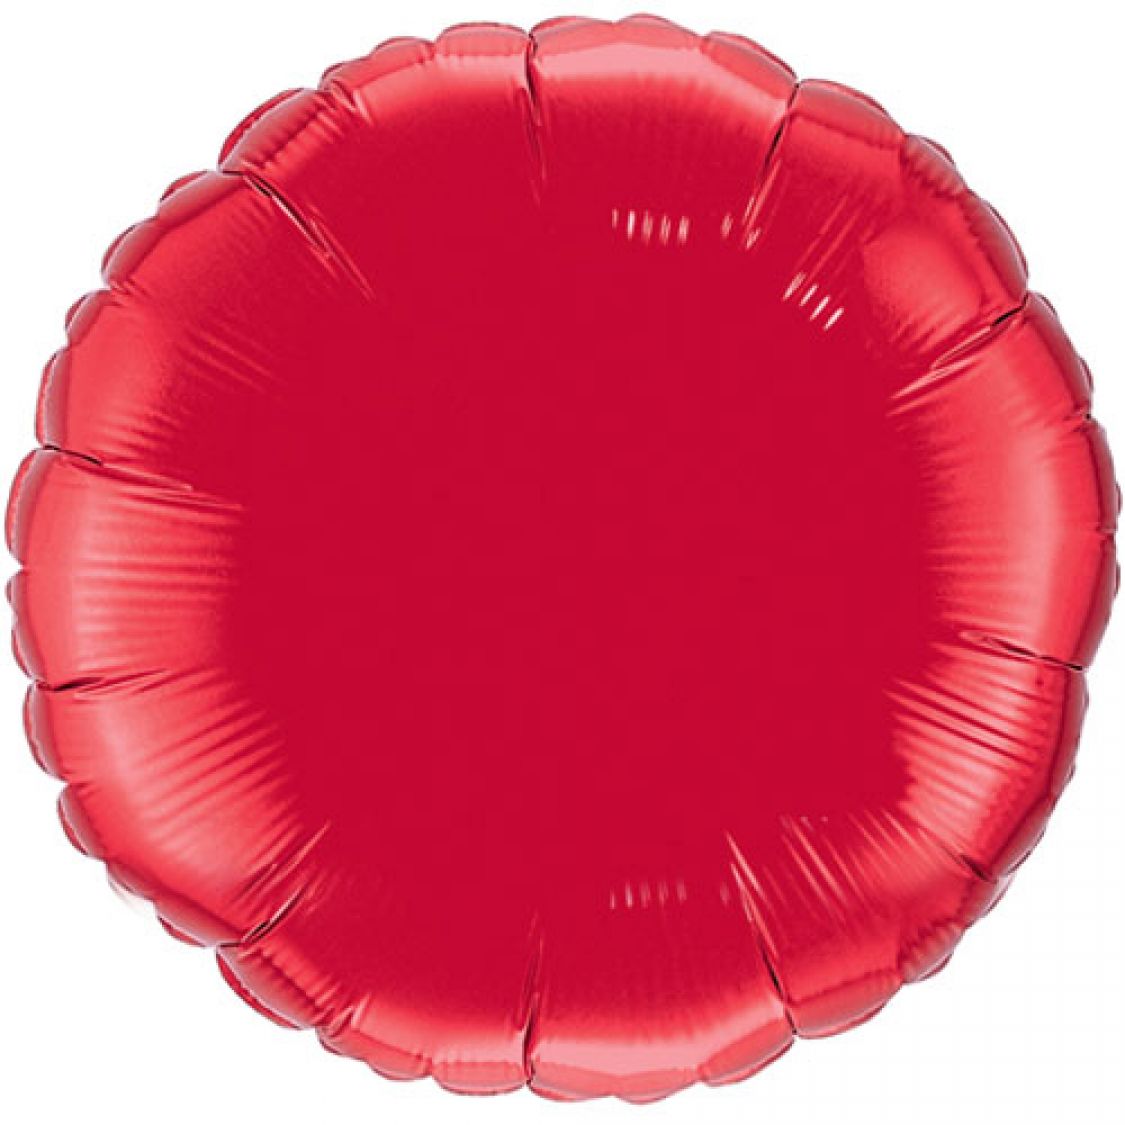 Ballon Mylar rond rouge rubis (ruby red)